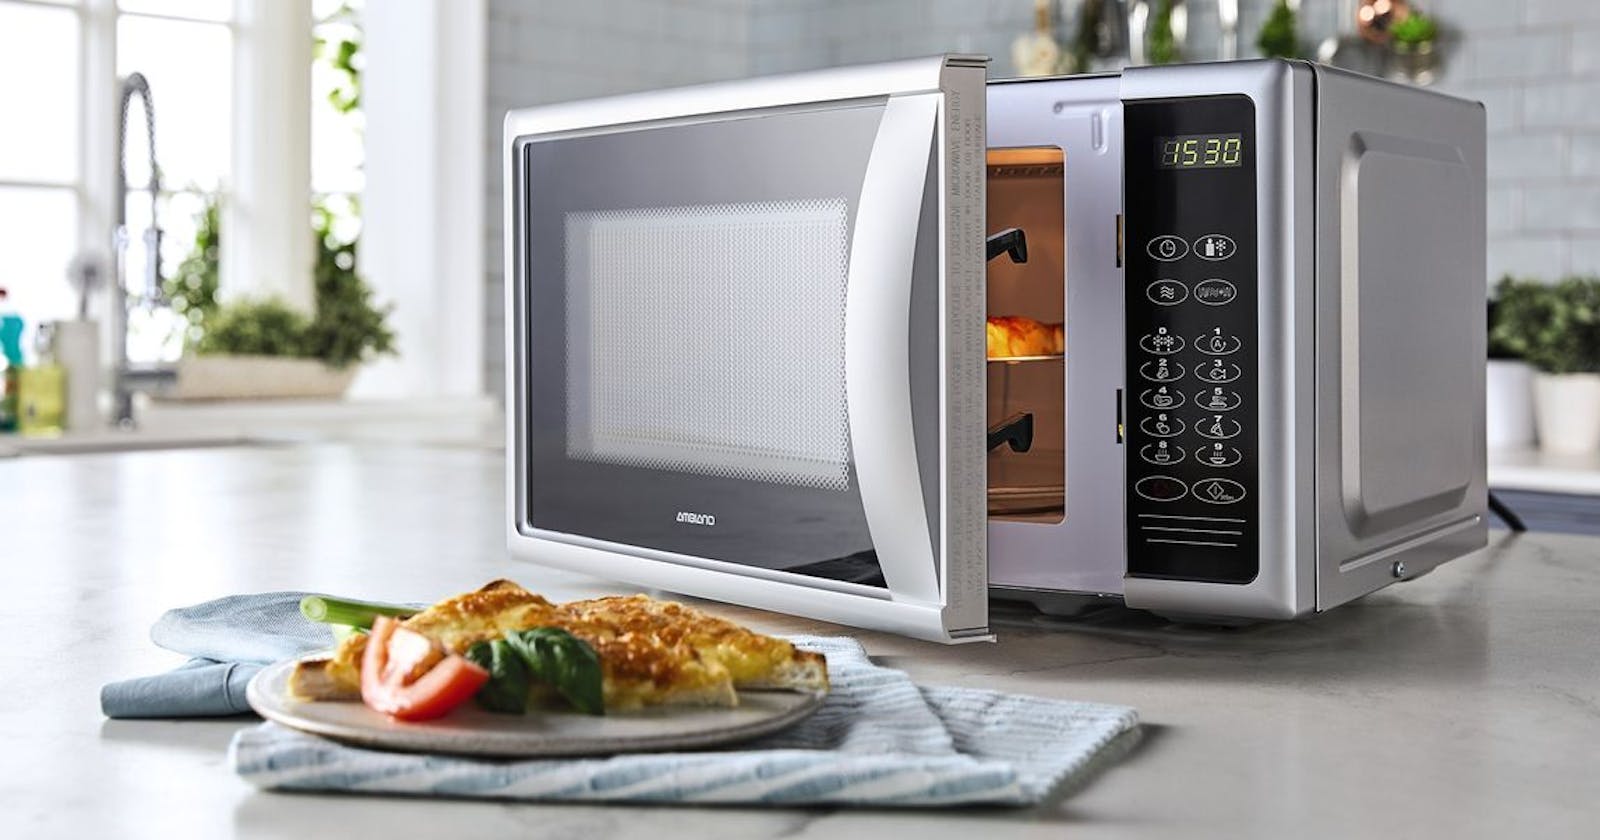 Choosing A Microwave Oven